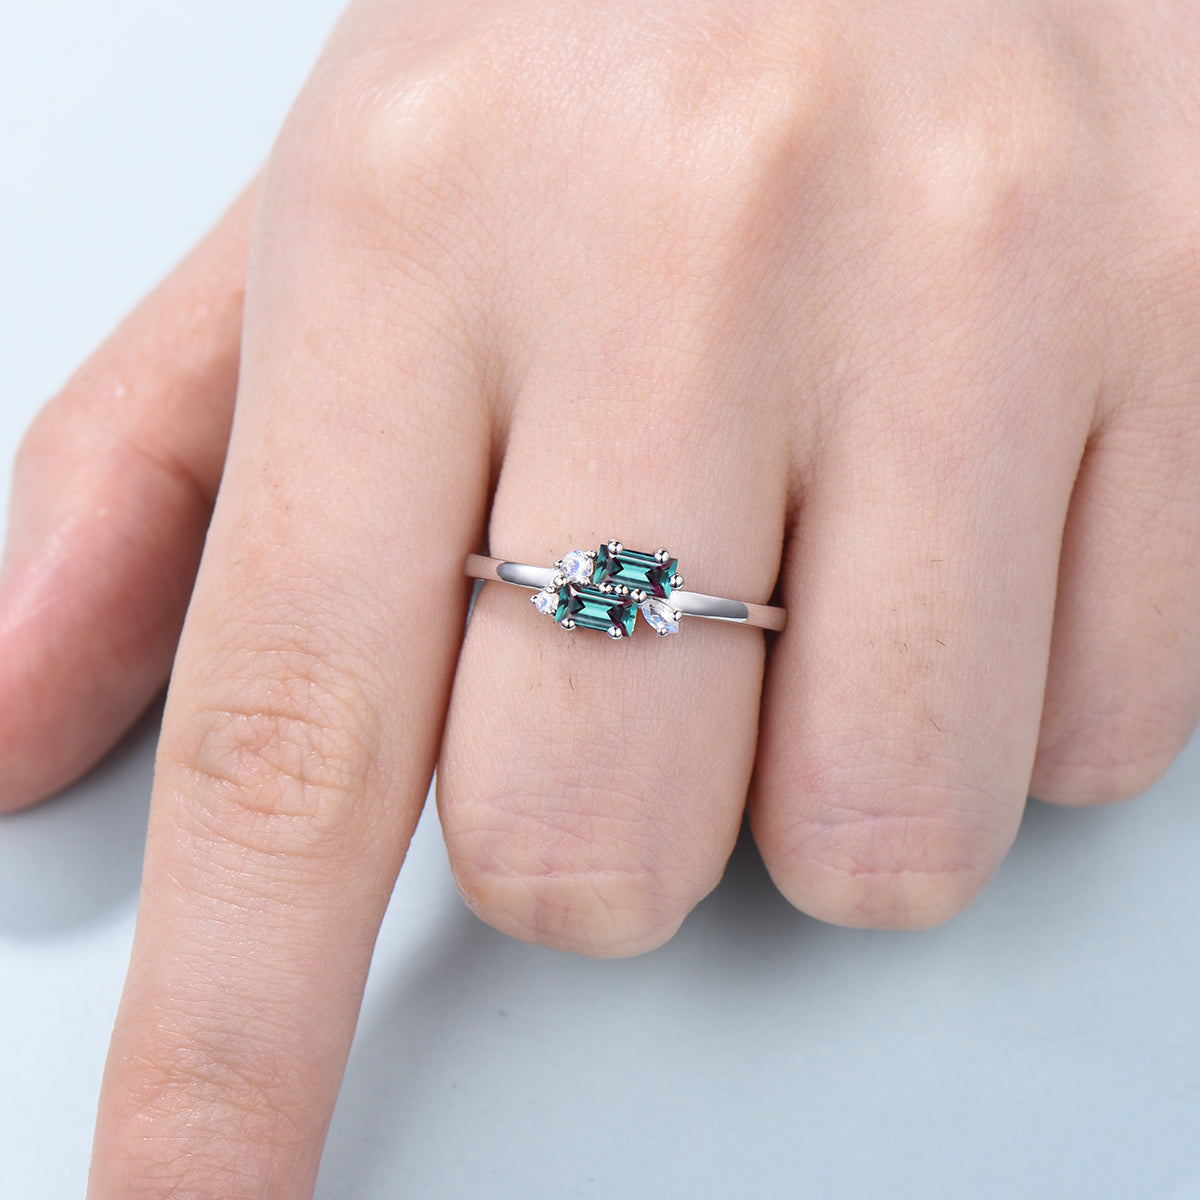 Unique Baguette Alexandrite Ring Alexandrite moonstone Wedding Ring Rose Gold Stacking Dainty Ring June Birthstone Ring Anniversary Gift - PENFINE